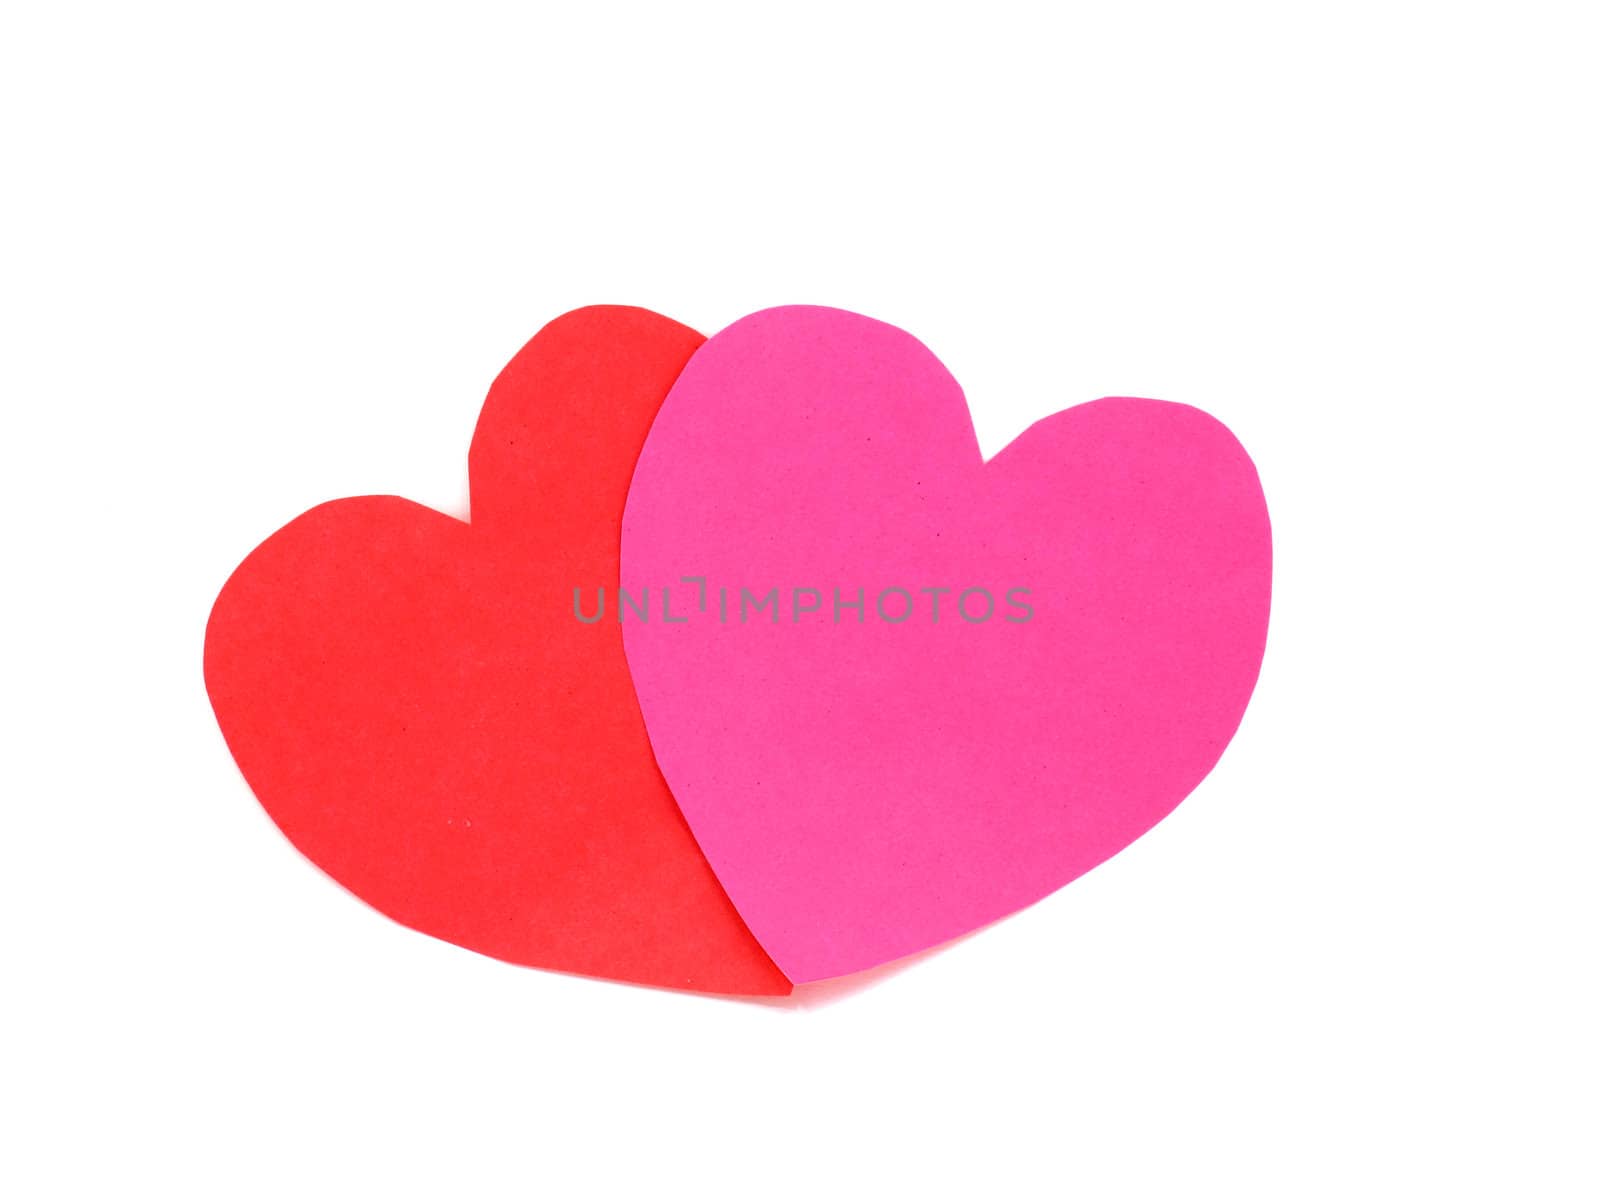 Red and pink hearts together on white background